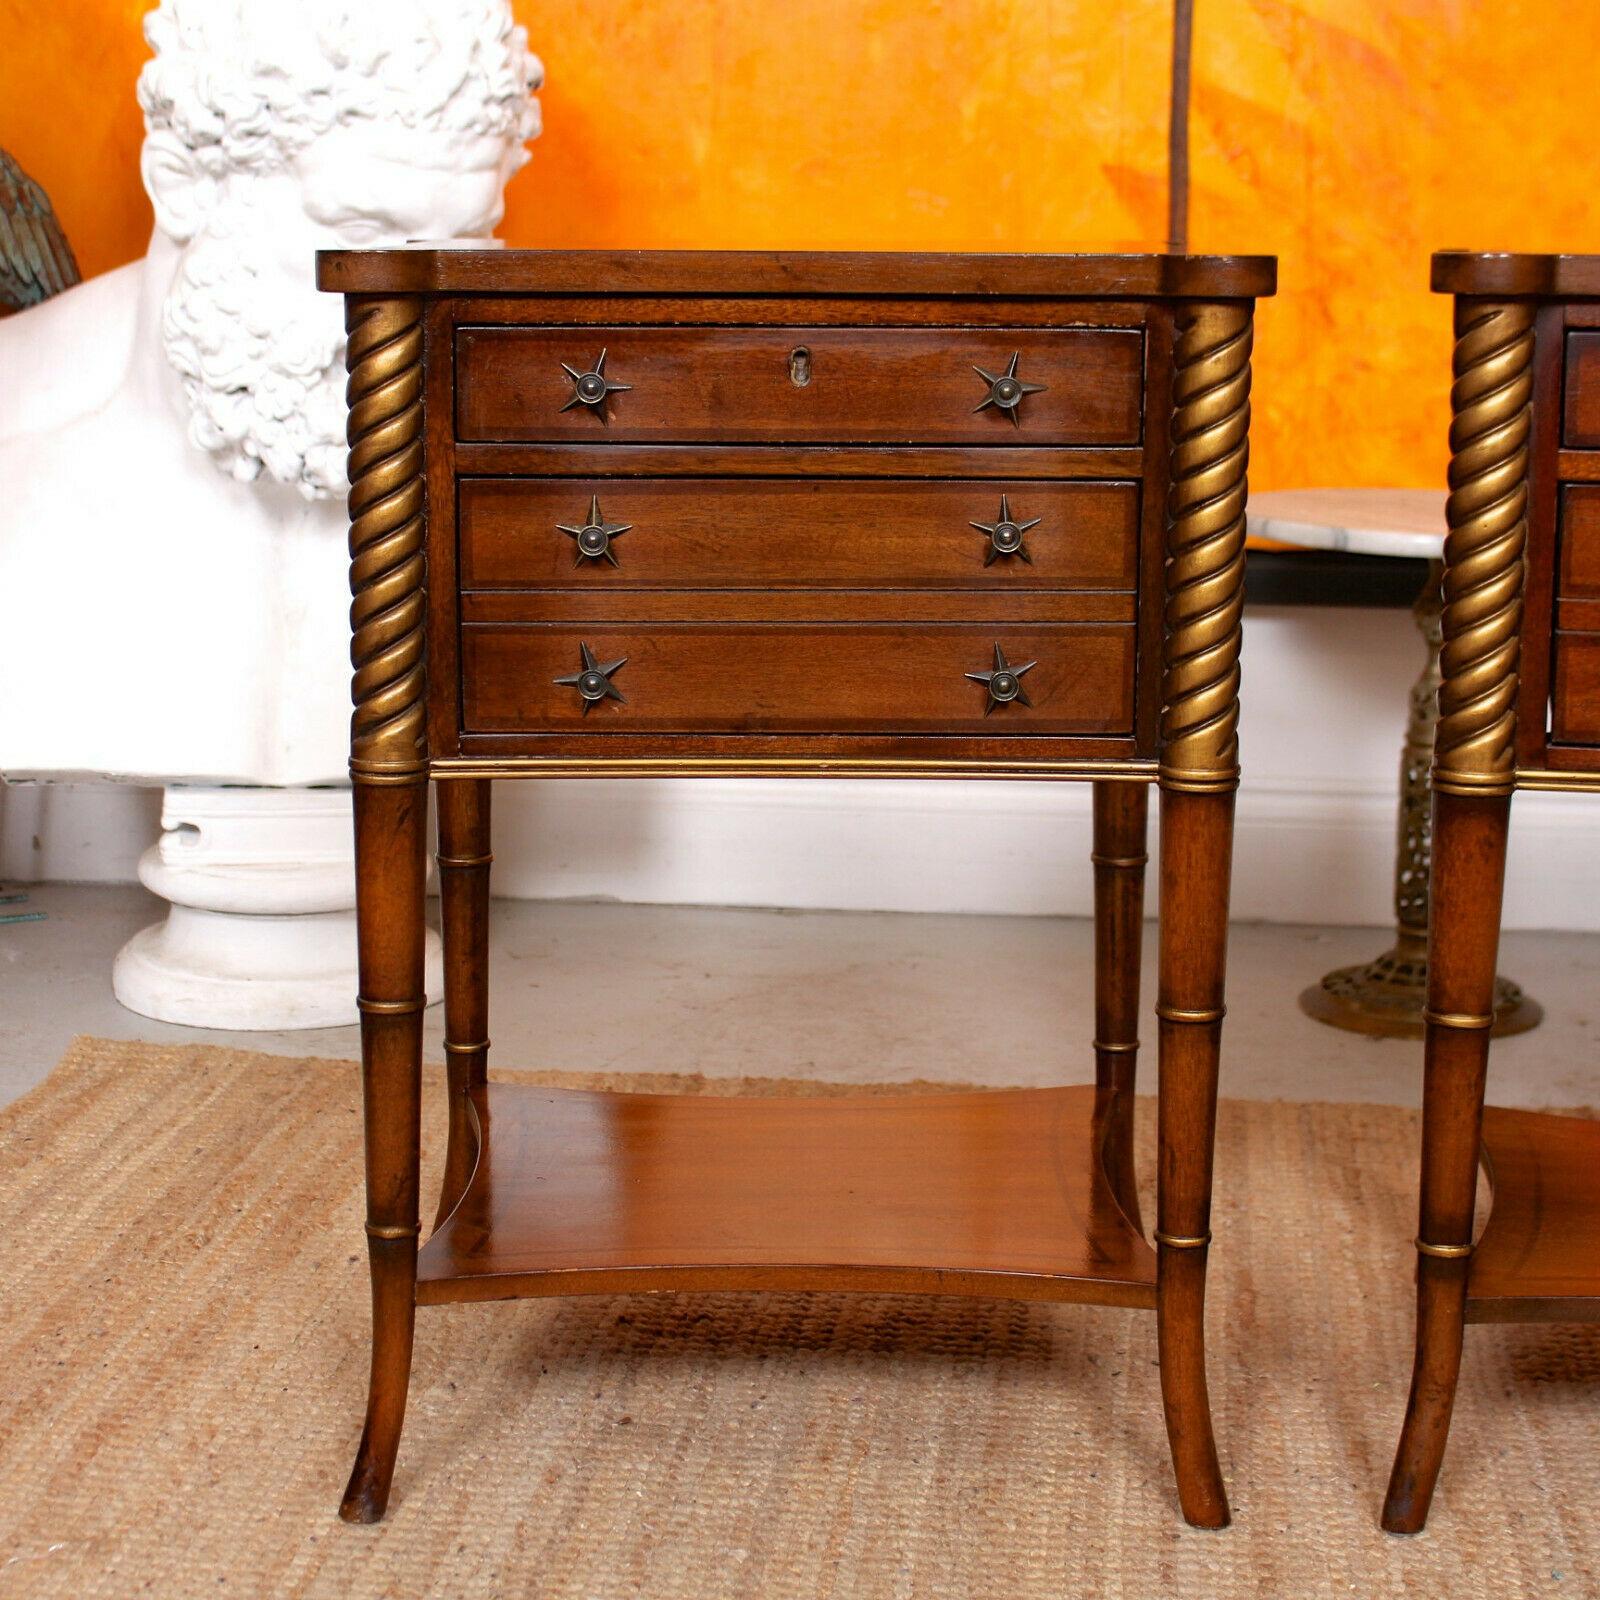 A pair of fine quality inlaid mahogany side tables by Drexel Heritage from the esteemed makers Covington Park collection.

The tops with inlaid borders with rounded corners, fitted three drawers each mounted with good handles, dovetailed jointing